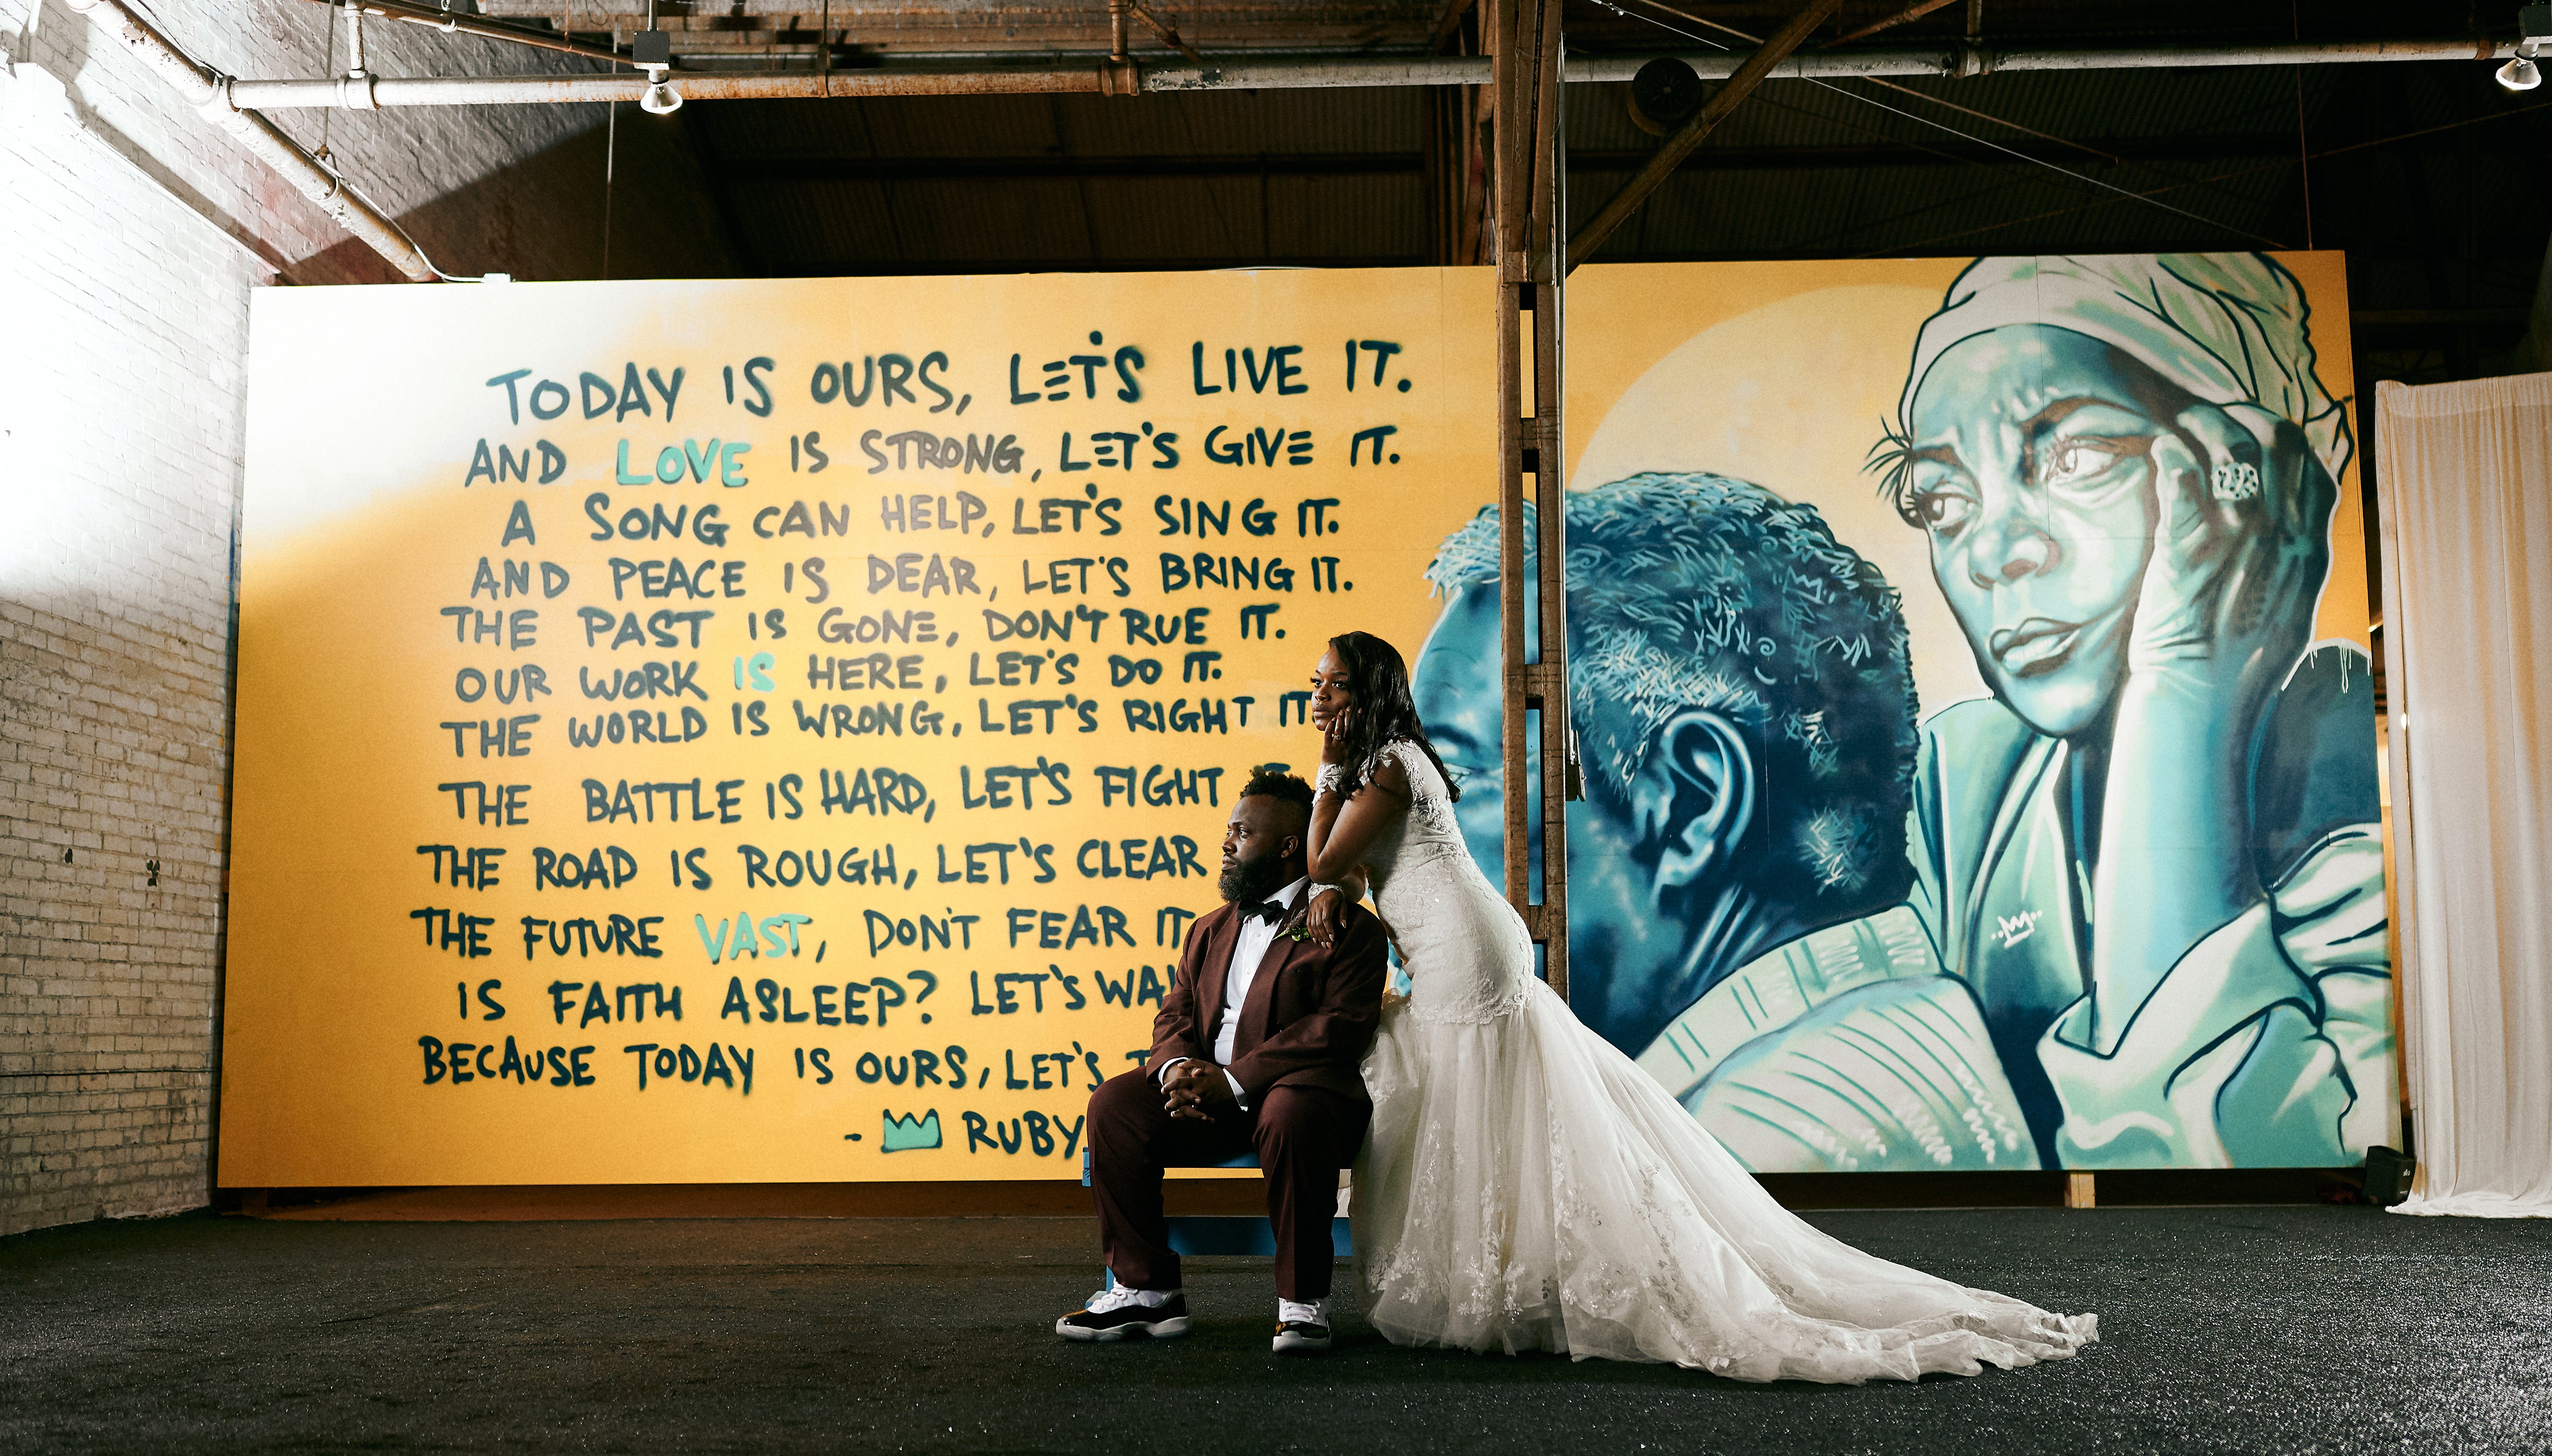 Bridal Bliss: A Round Of Applause For Brittany and Reginald's Woke New Orleans Wedding